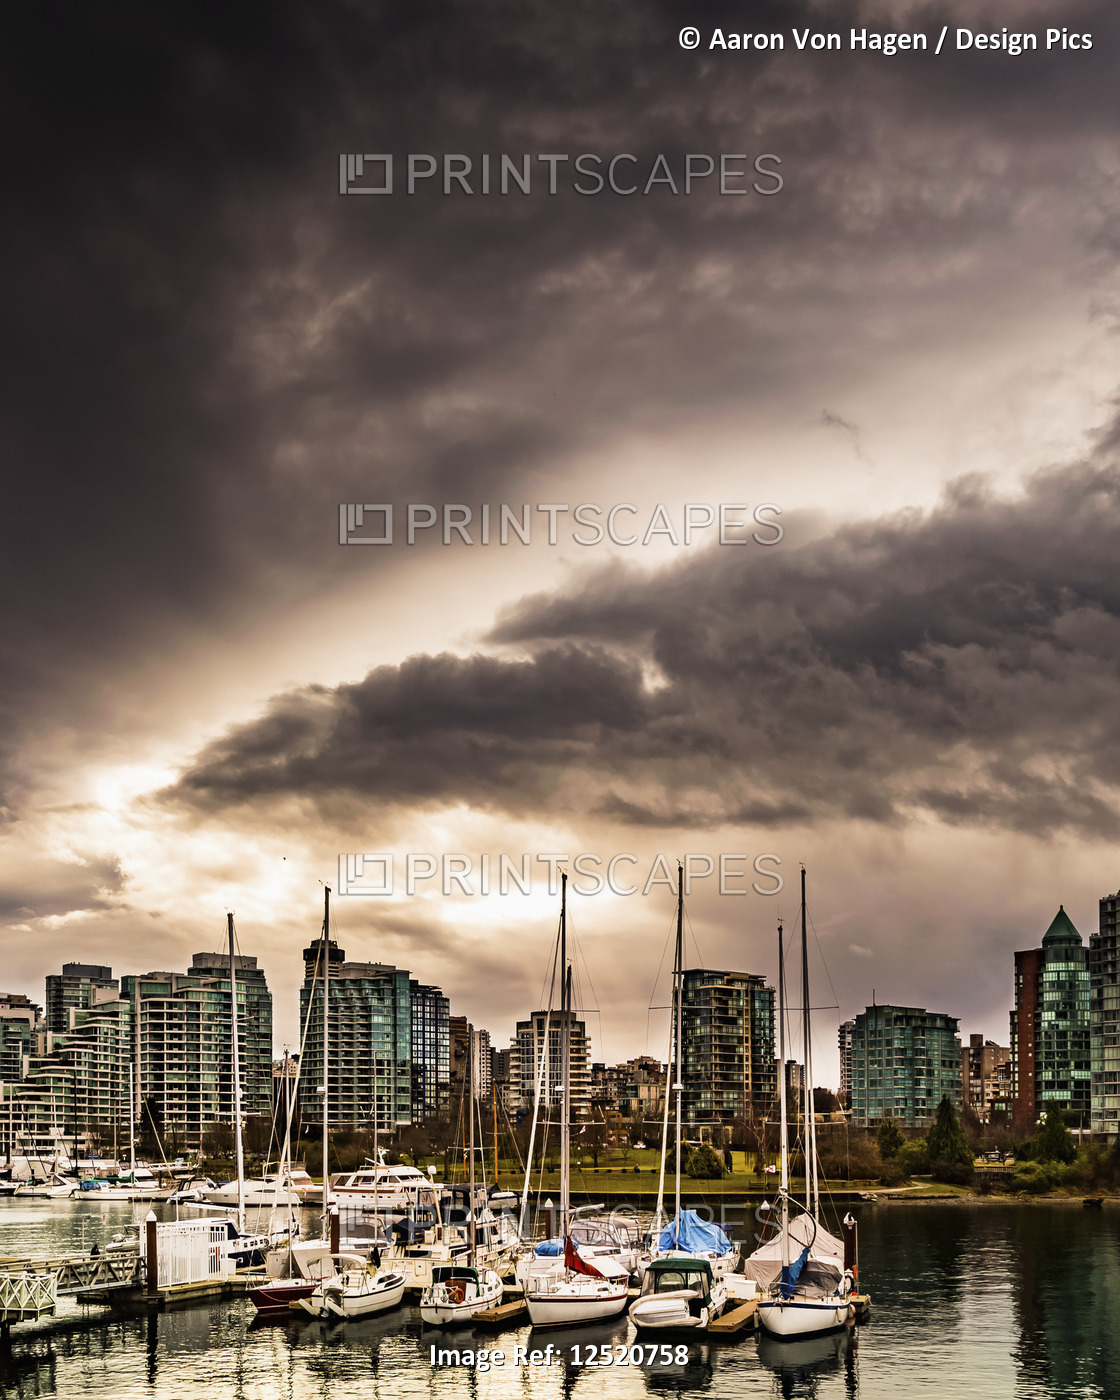 Condominium buildings and sailboats moored in the harbour under dark clouds; ...